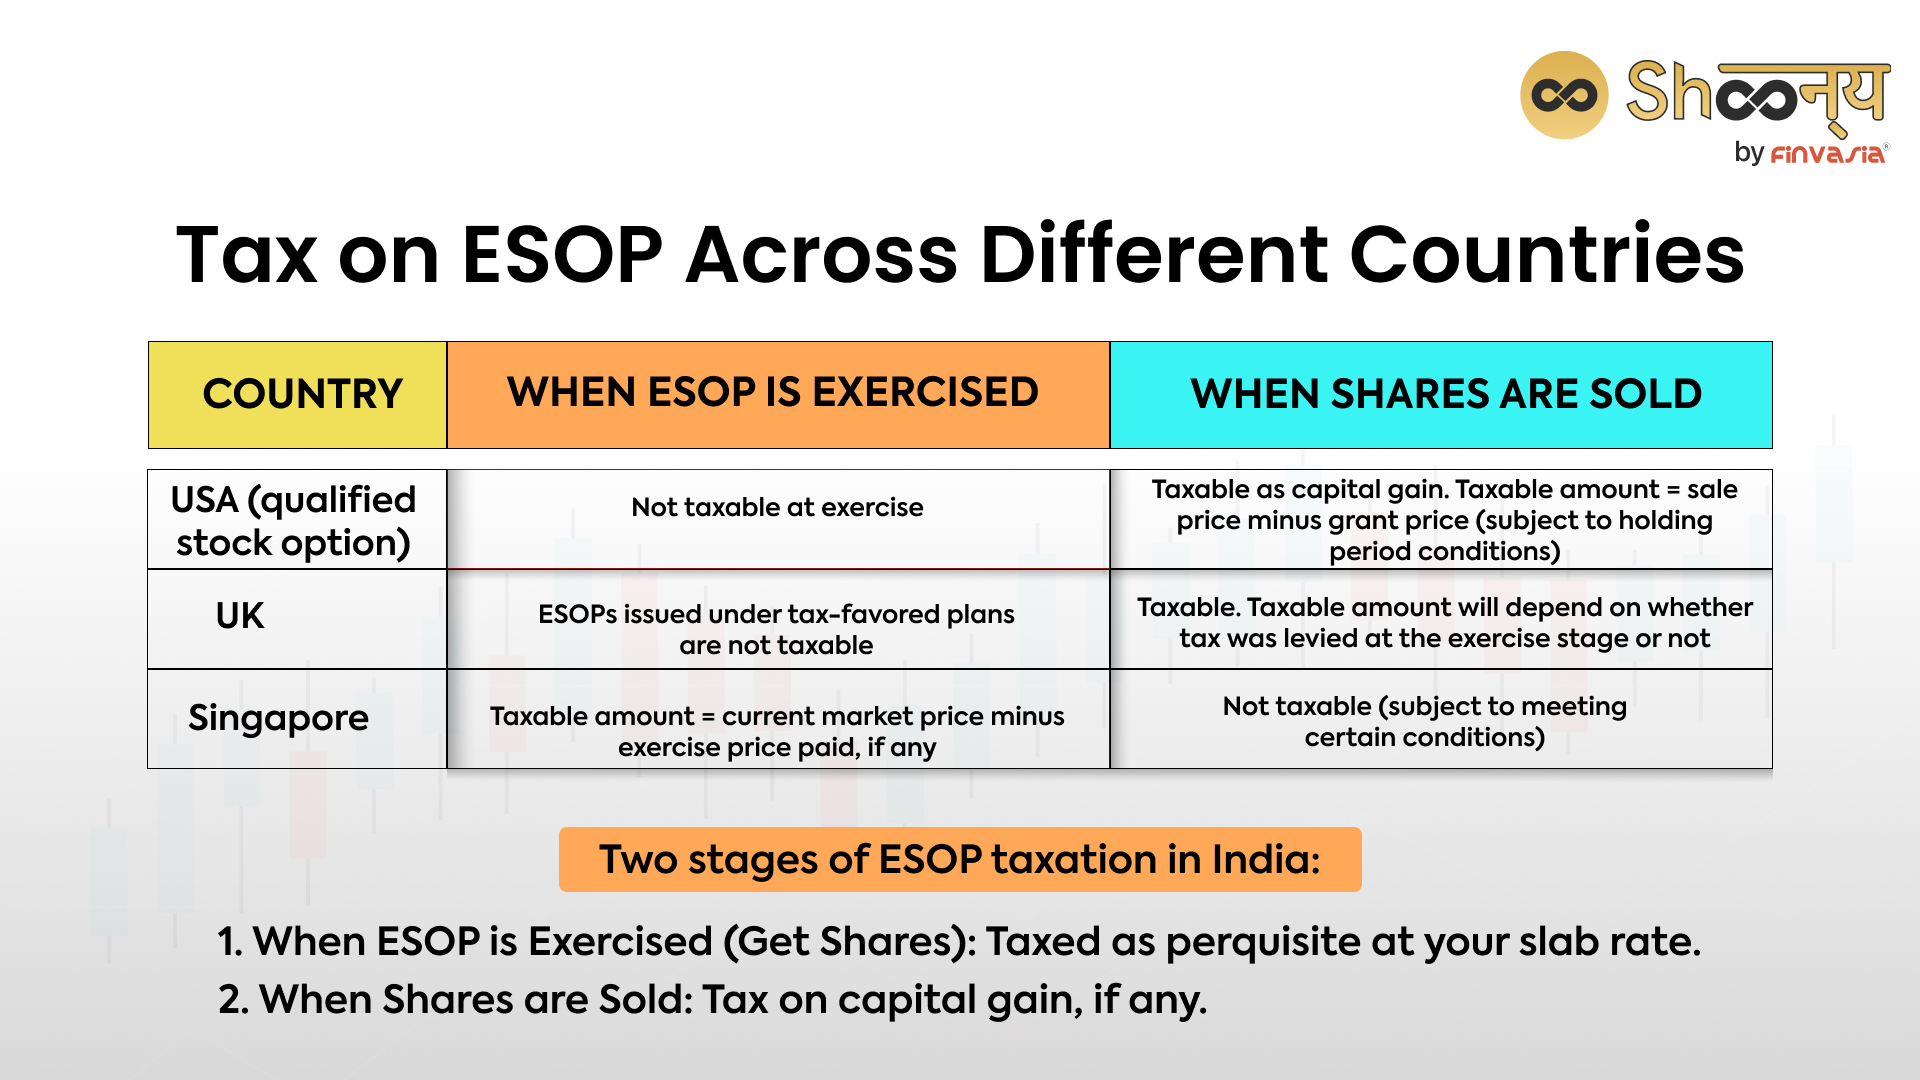 Tax on ESOP Across Different Countries
